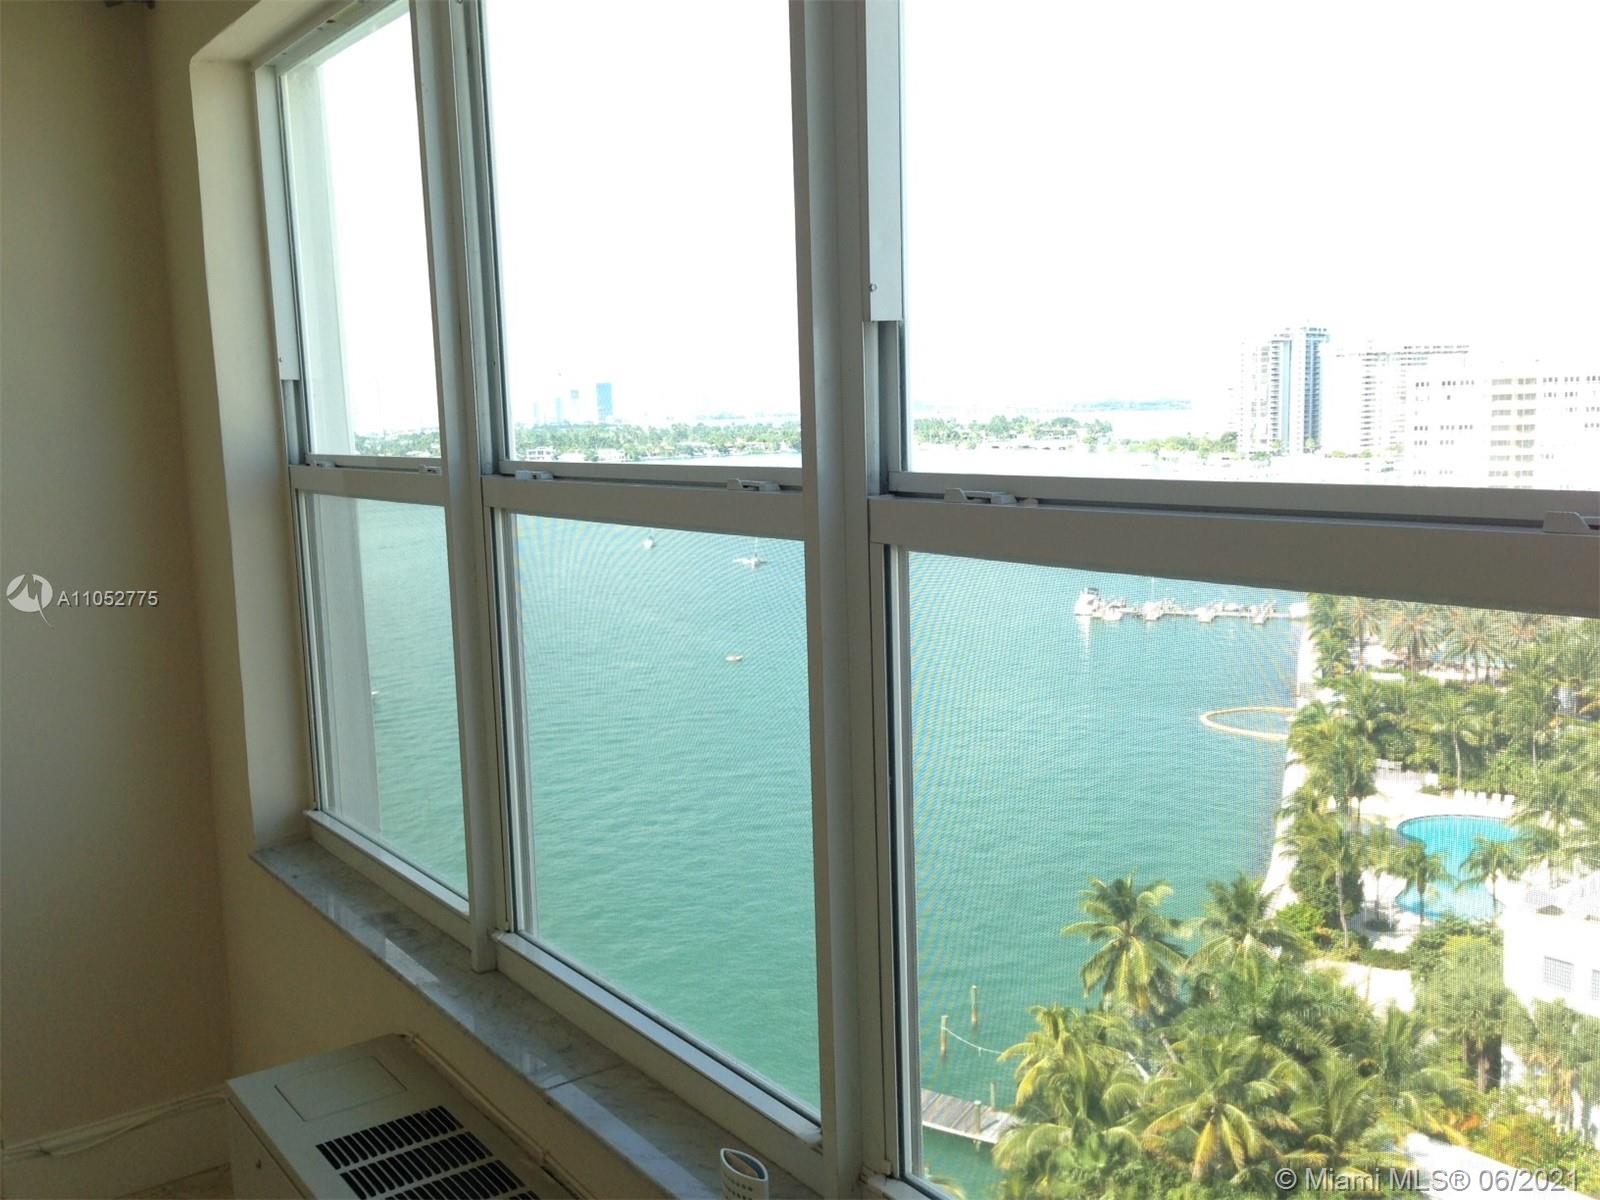 1250 West Ave 15C, Miami Beach, Florida 33139, 1 Bedroom Bedrooms, ,1 BathroomBathrooms,Residential,For Sale,1250 West Ave 15C,A11052775